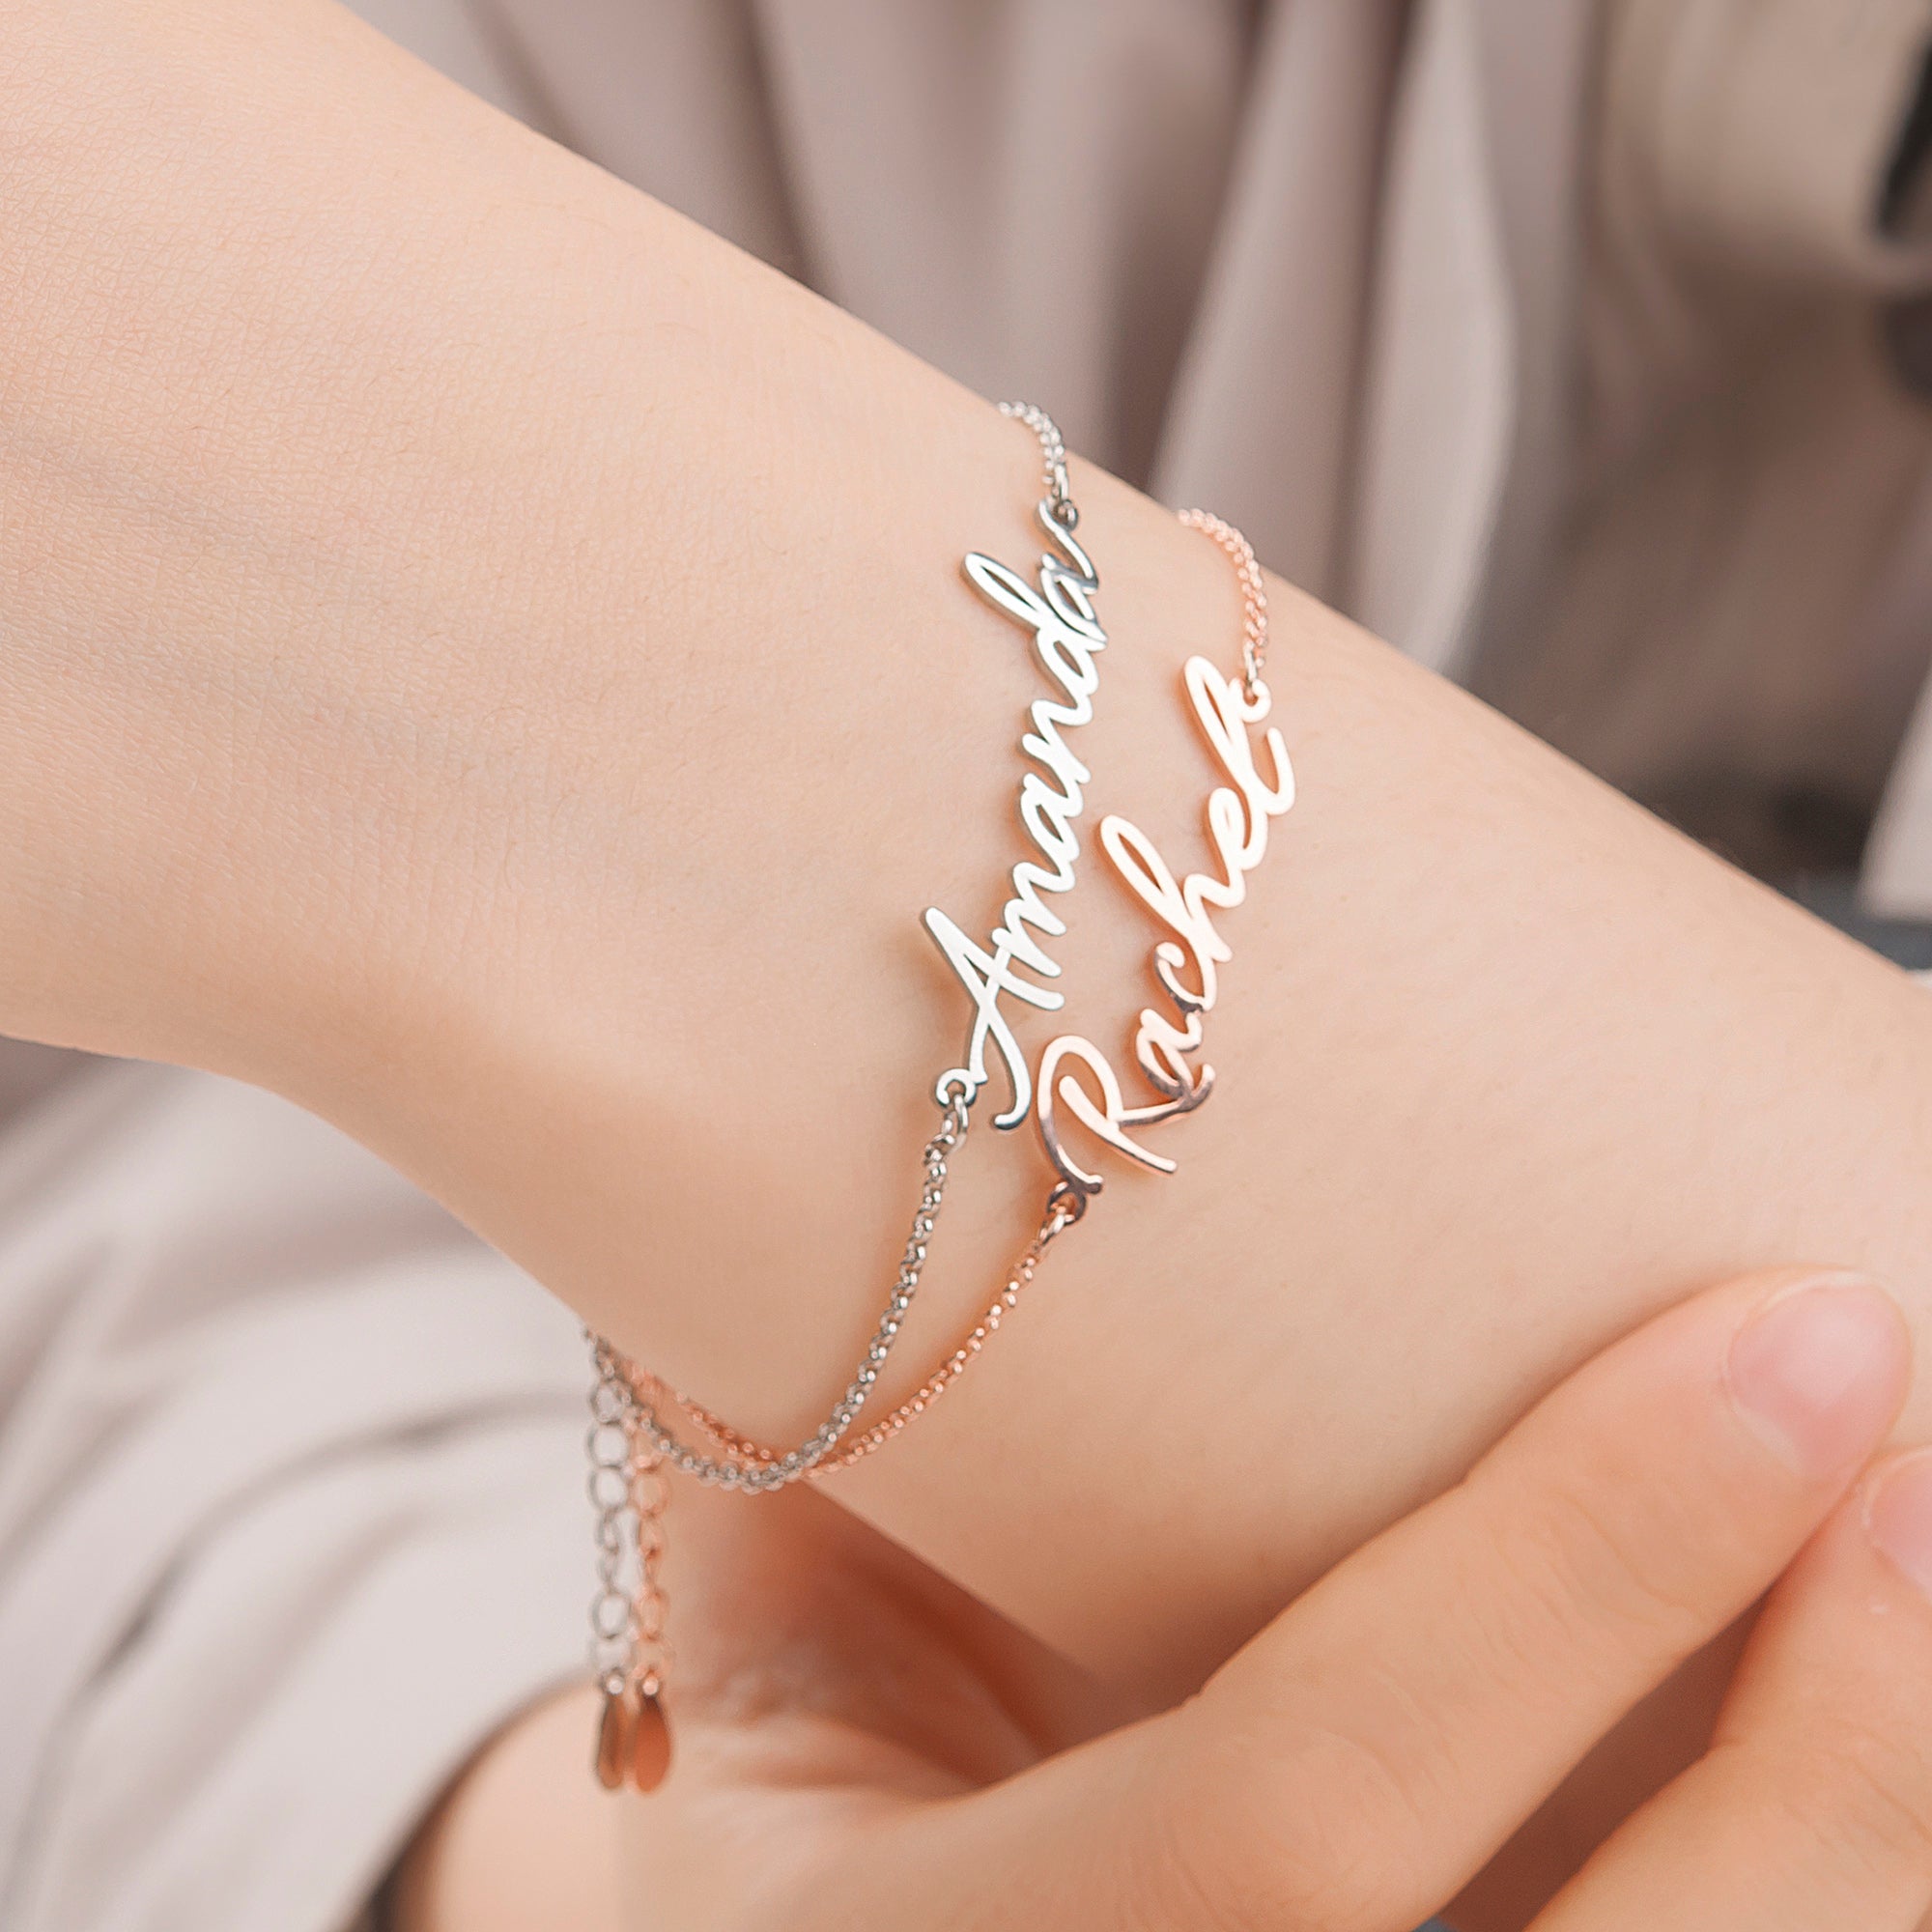 Buy Baby Name Bracelet Sterling Silver Boy or Girl Engraved Bar Bracelet  Custom Kids Jewelry for Little Child Personalized New Baby Gift Online in  India - Etsy